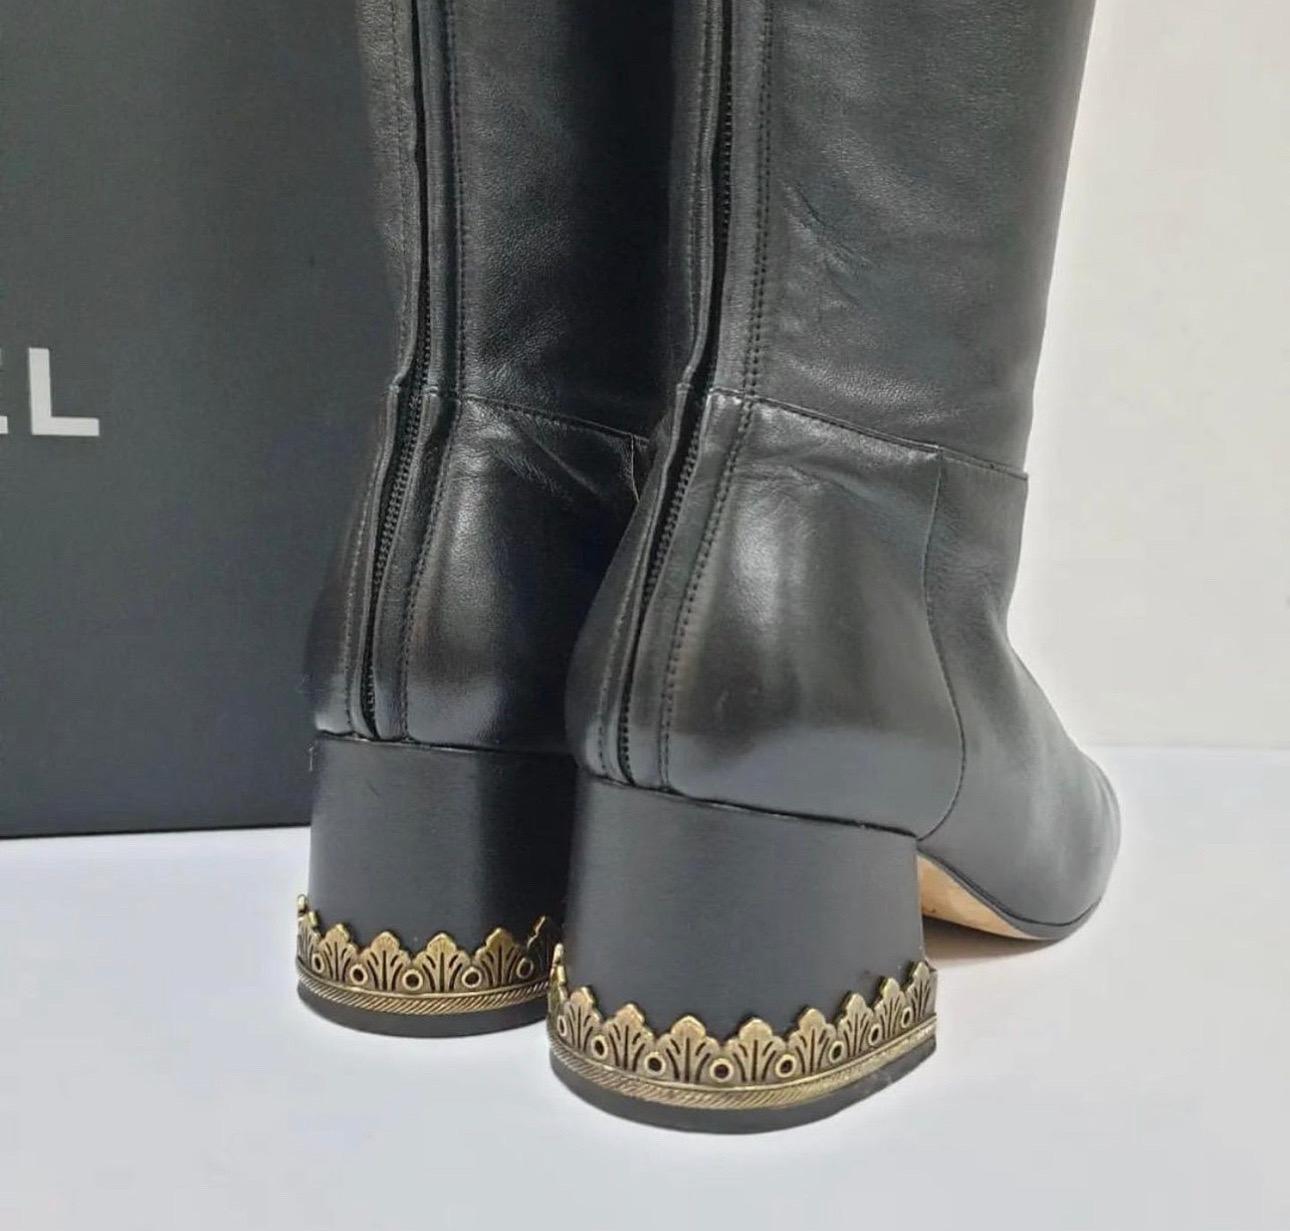 Chanel Black Leather Thigh High Over The Knee Boots In Good Condition For Sale In Krakow, PL